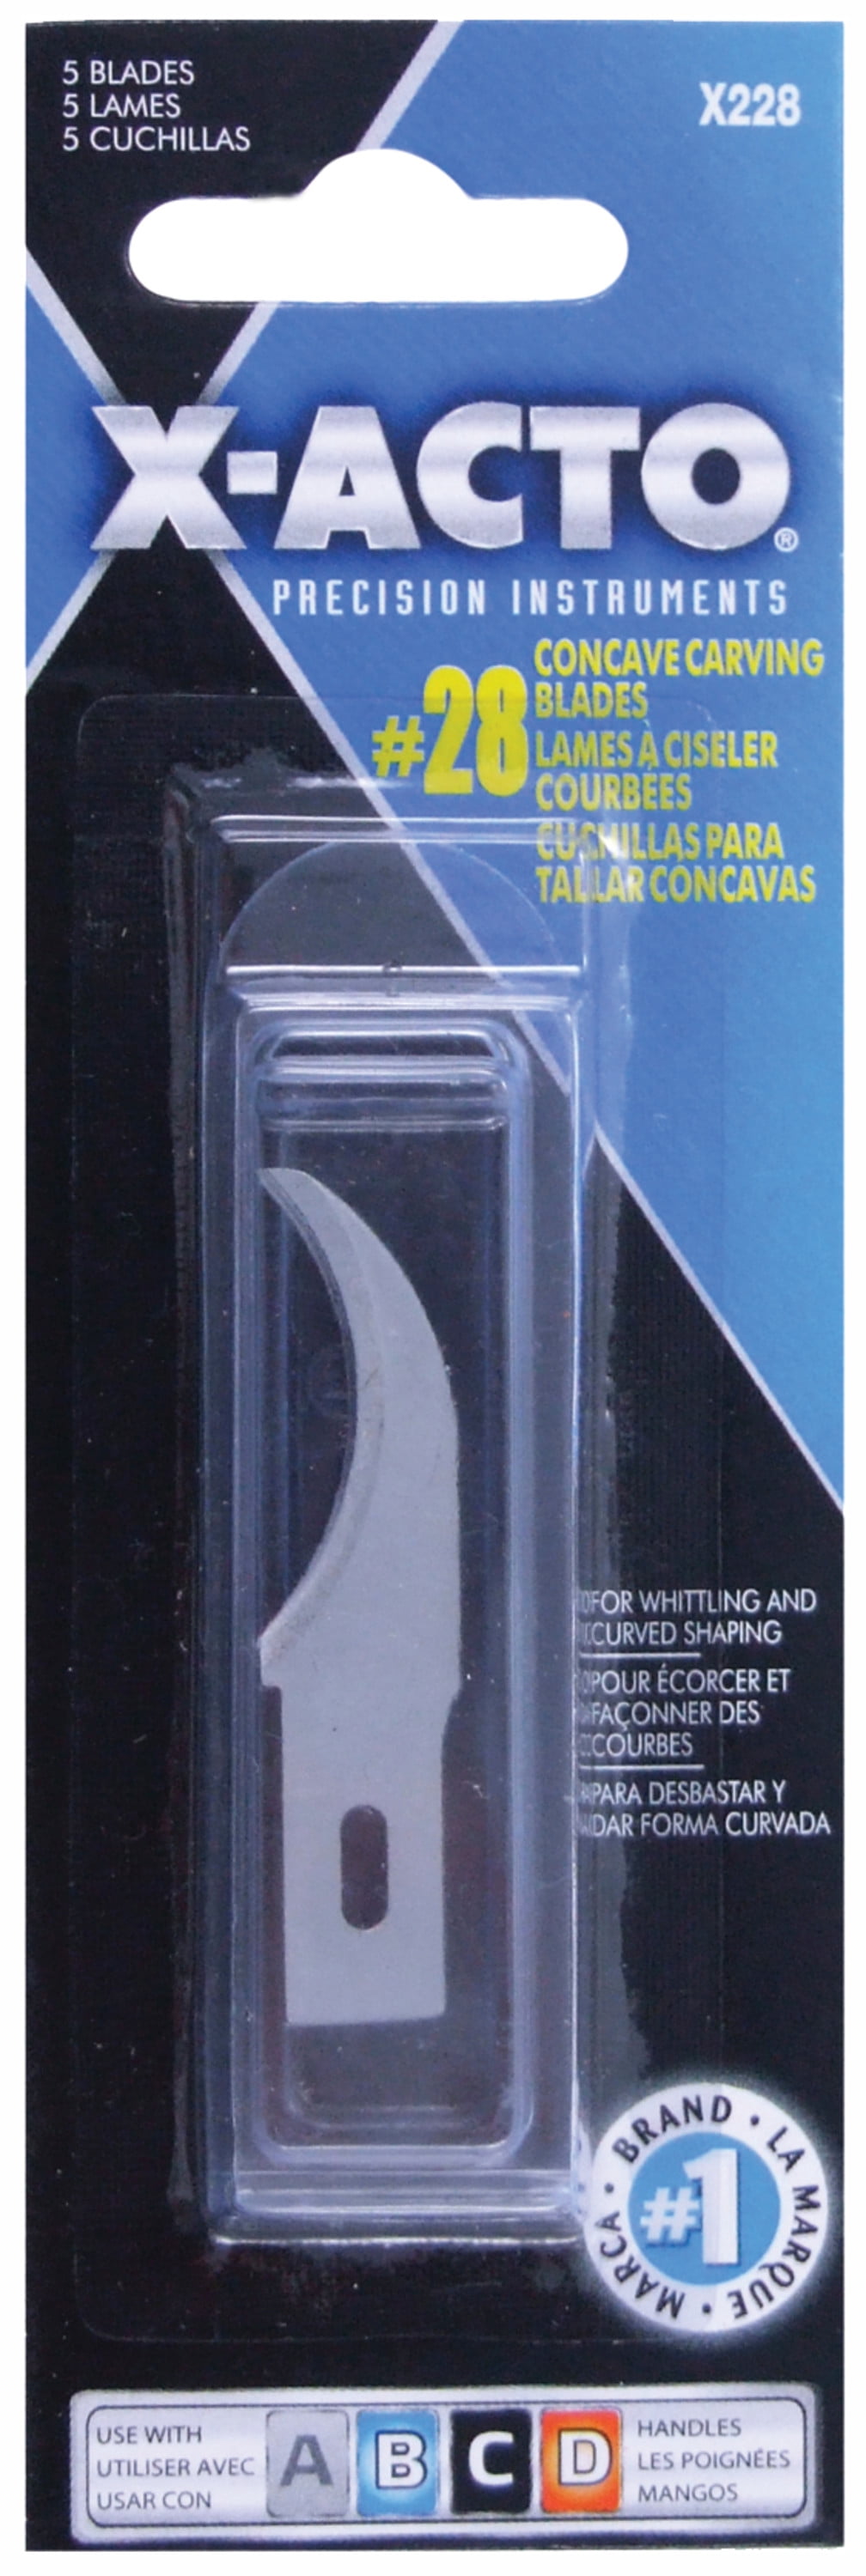 X-acto Knife Blade - #28X228 5/Pk Carded CONCVE Carving Bld